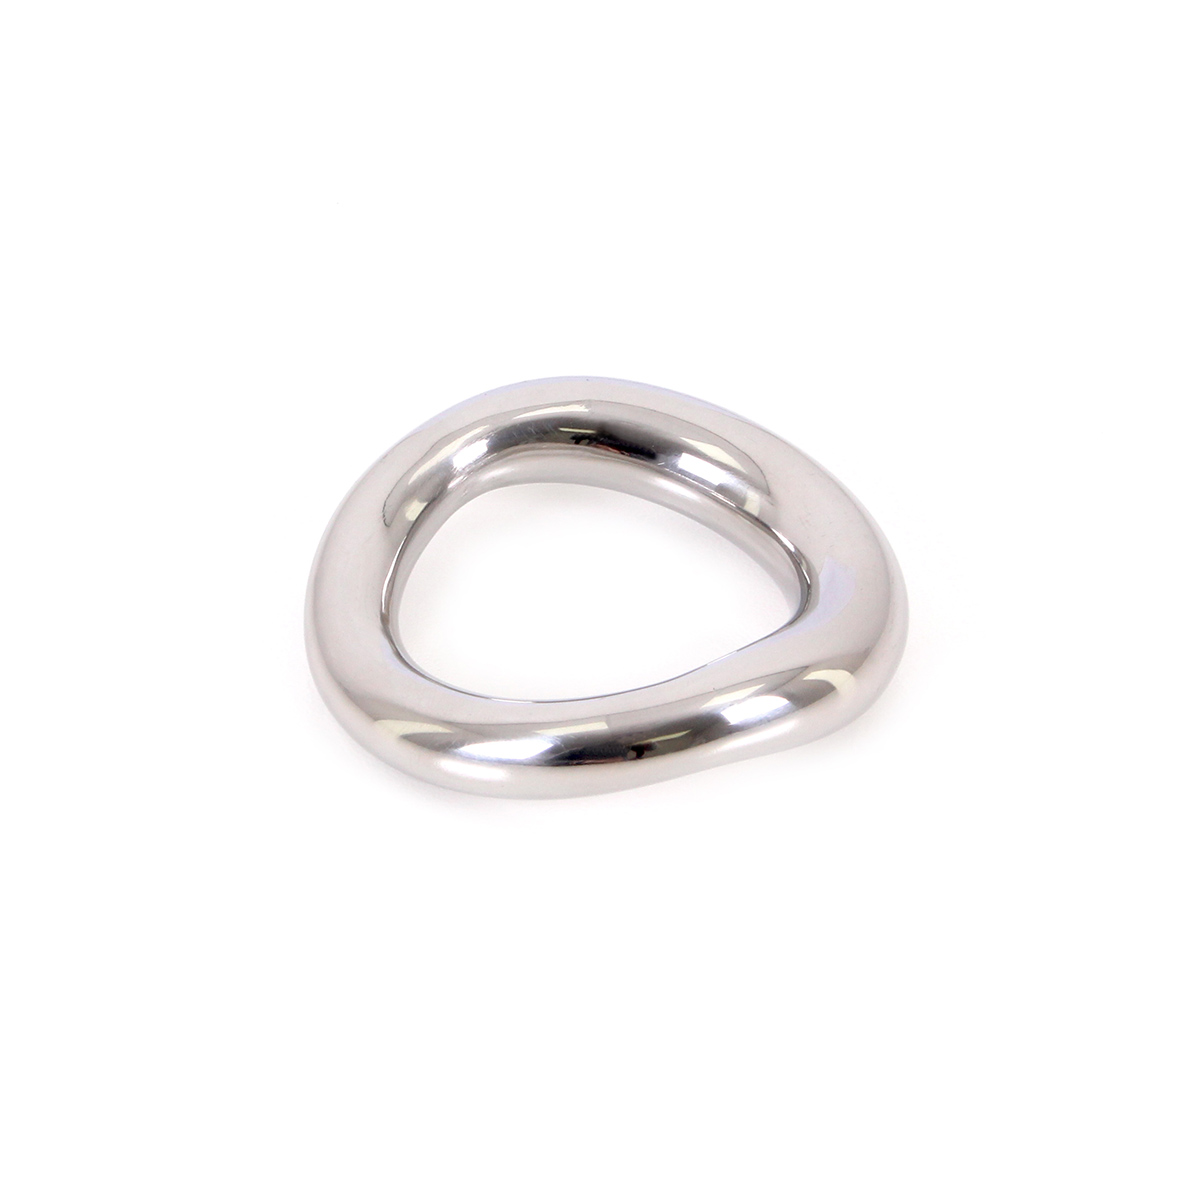 Costum-Fit-Cockring-50-mm-OPR-277046-3